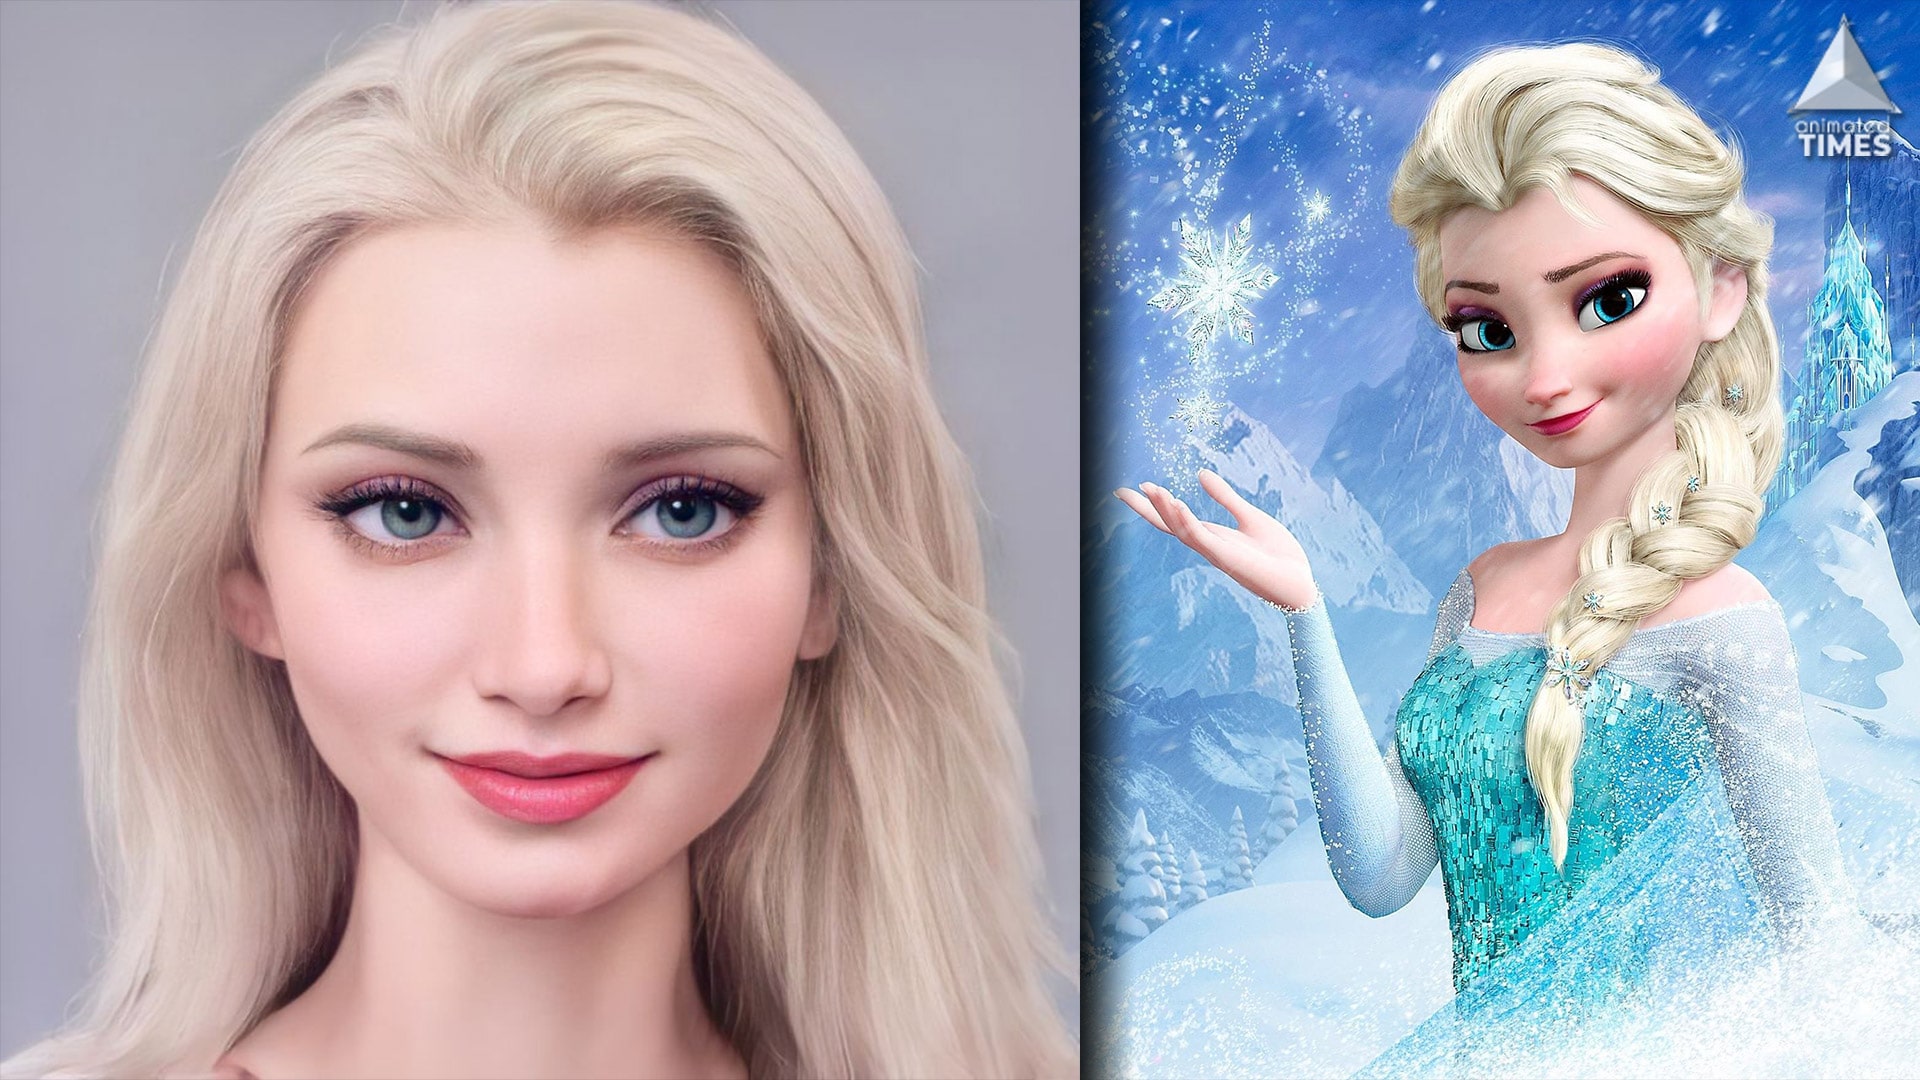 This Artist Used AI To Make Disney Characters Look Like Real People